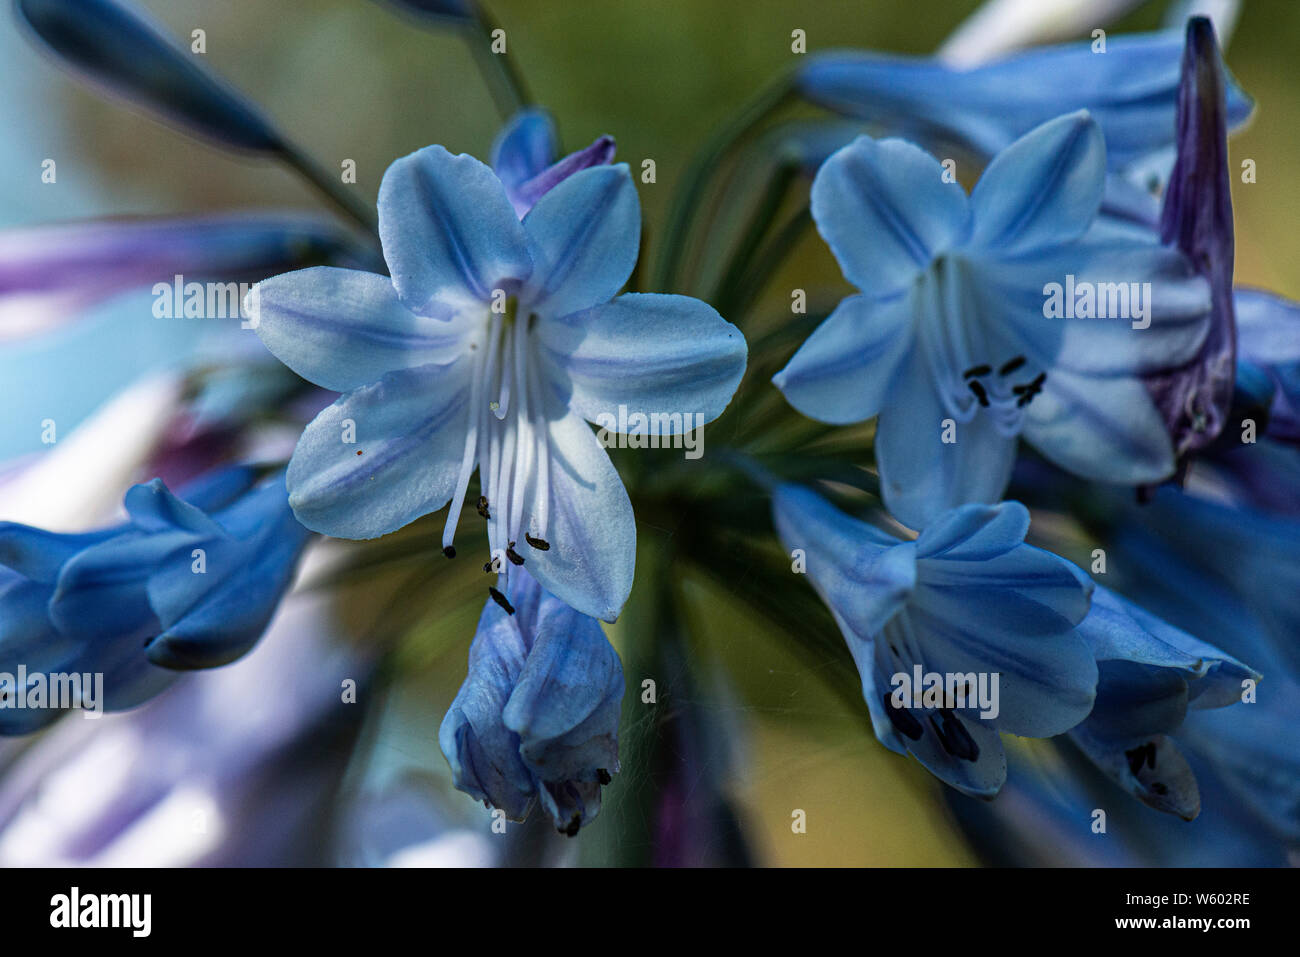 A close up of the flowers of an African lily (Agapanthus) Stock Photo